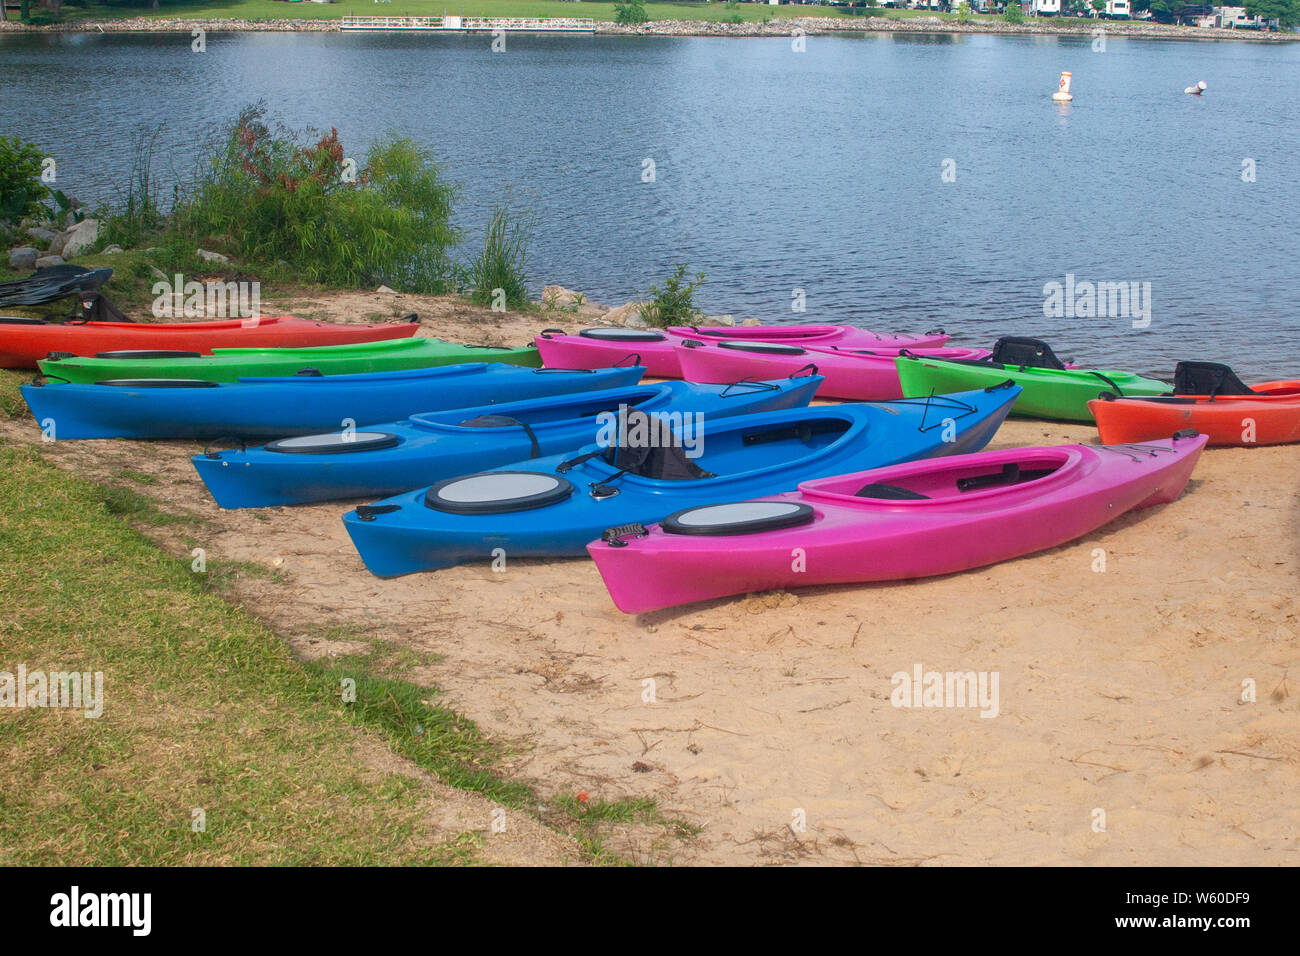 Colorful Kayaks on sandy beach next to lake, ready for outdoor activities Stock Photo